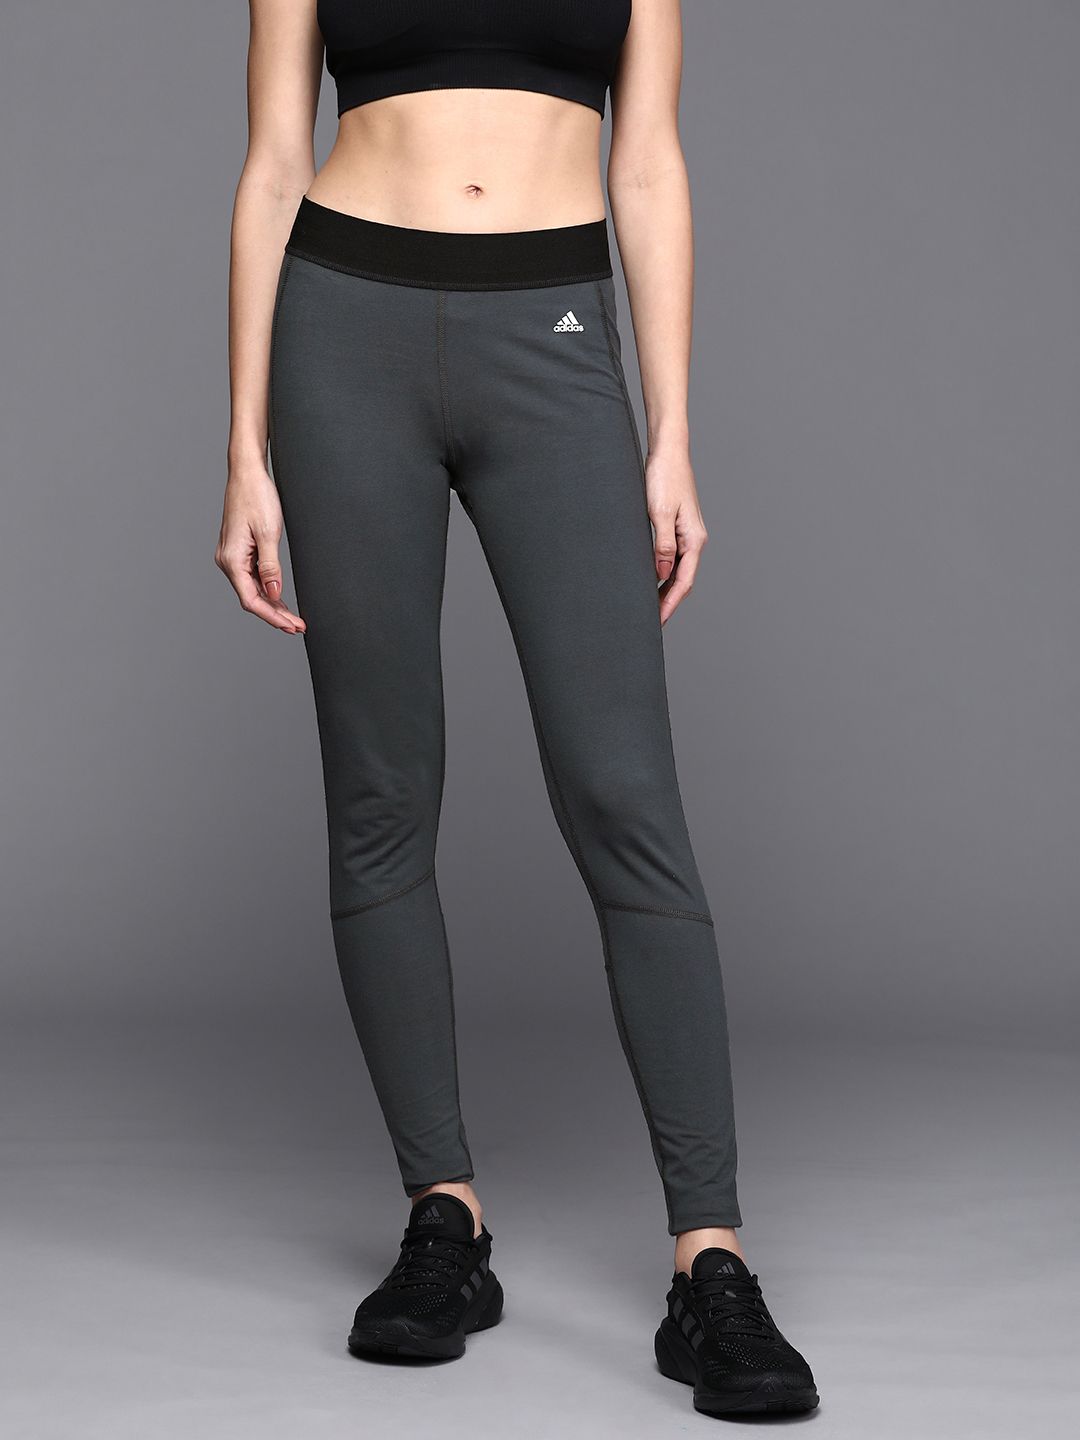 ADIDAS Women Charcoal Grey Essential Solid Tights Price in India